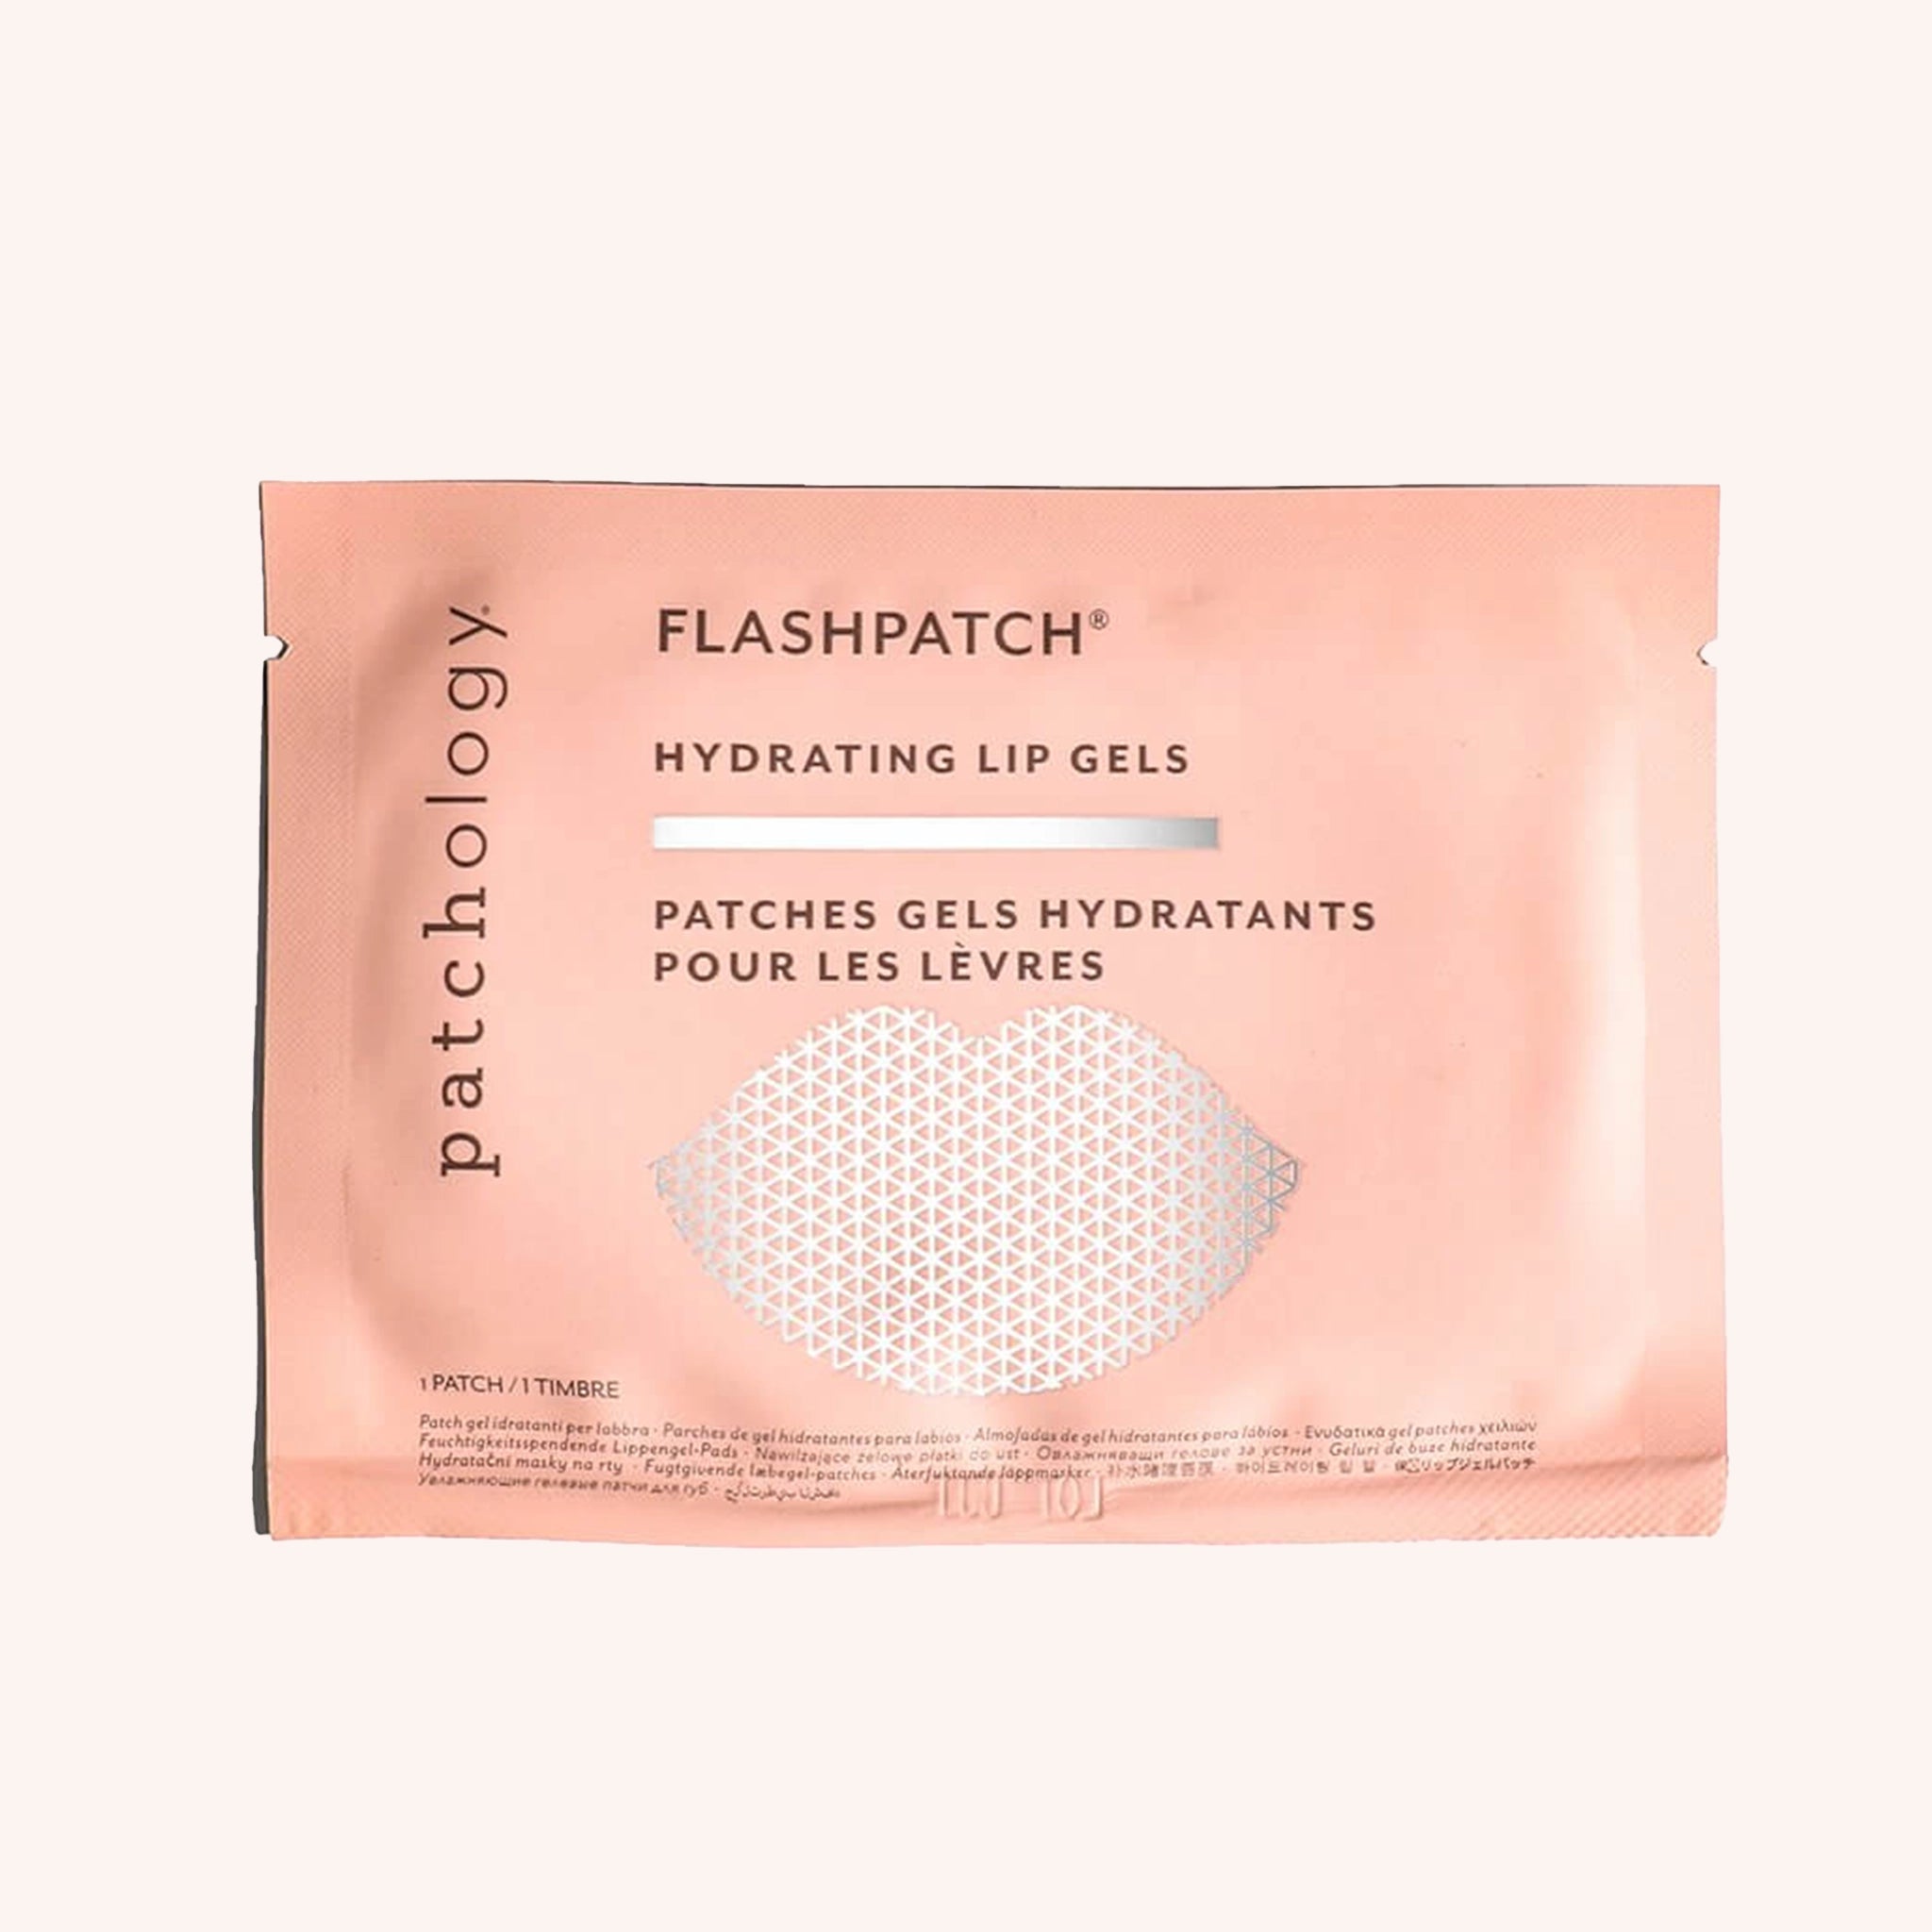 The pink packet that the lip mask comes in featuring black text that reads, &quot;Flashpatch Hydrating Lip Gels&quot;.